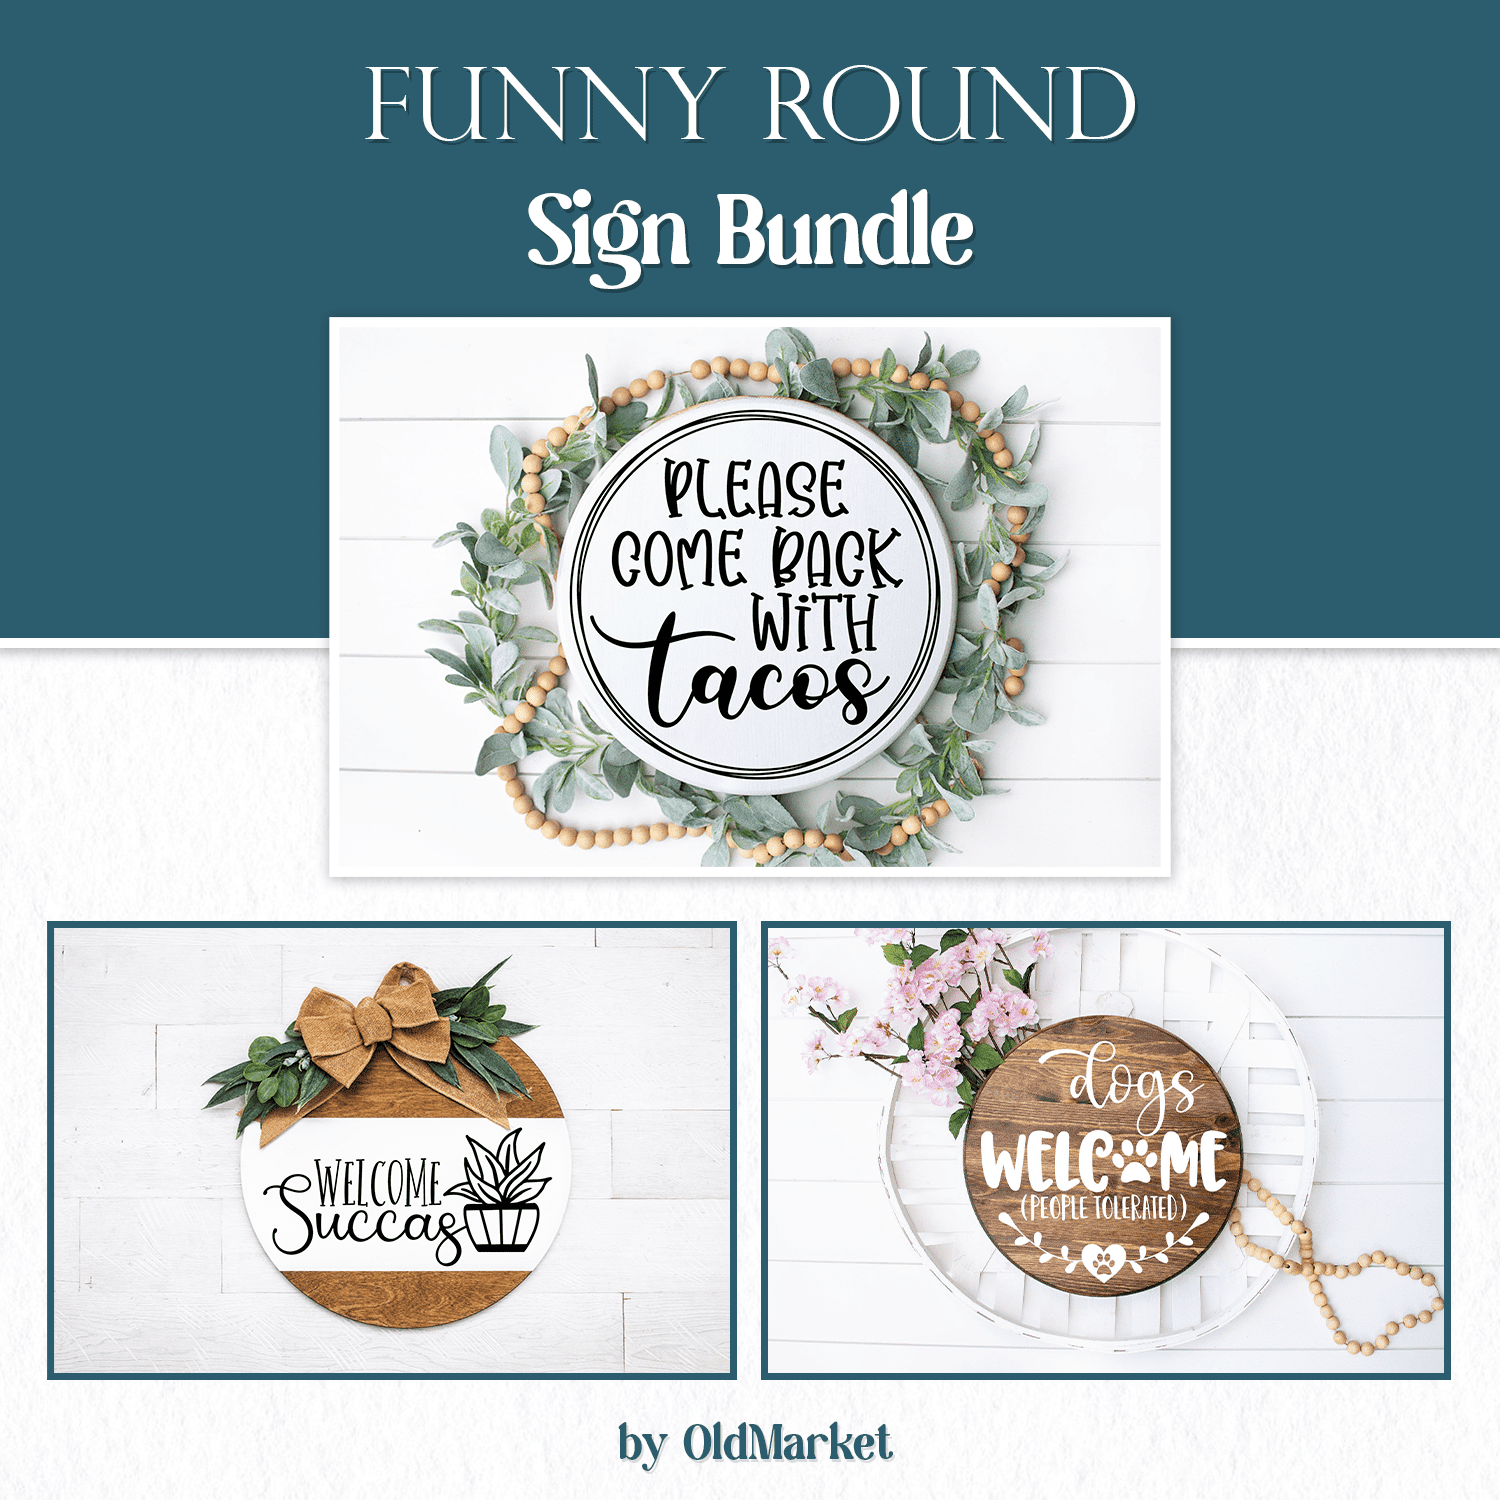 Funny Round Sign Bundle for your creative projects.